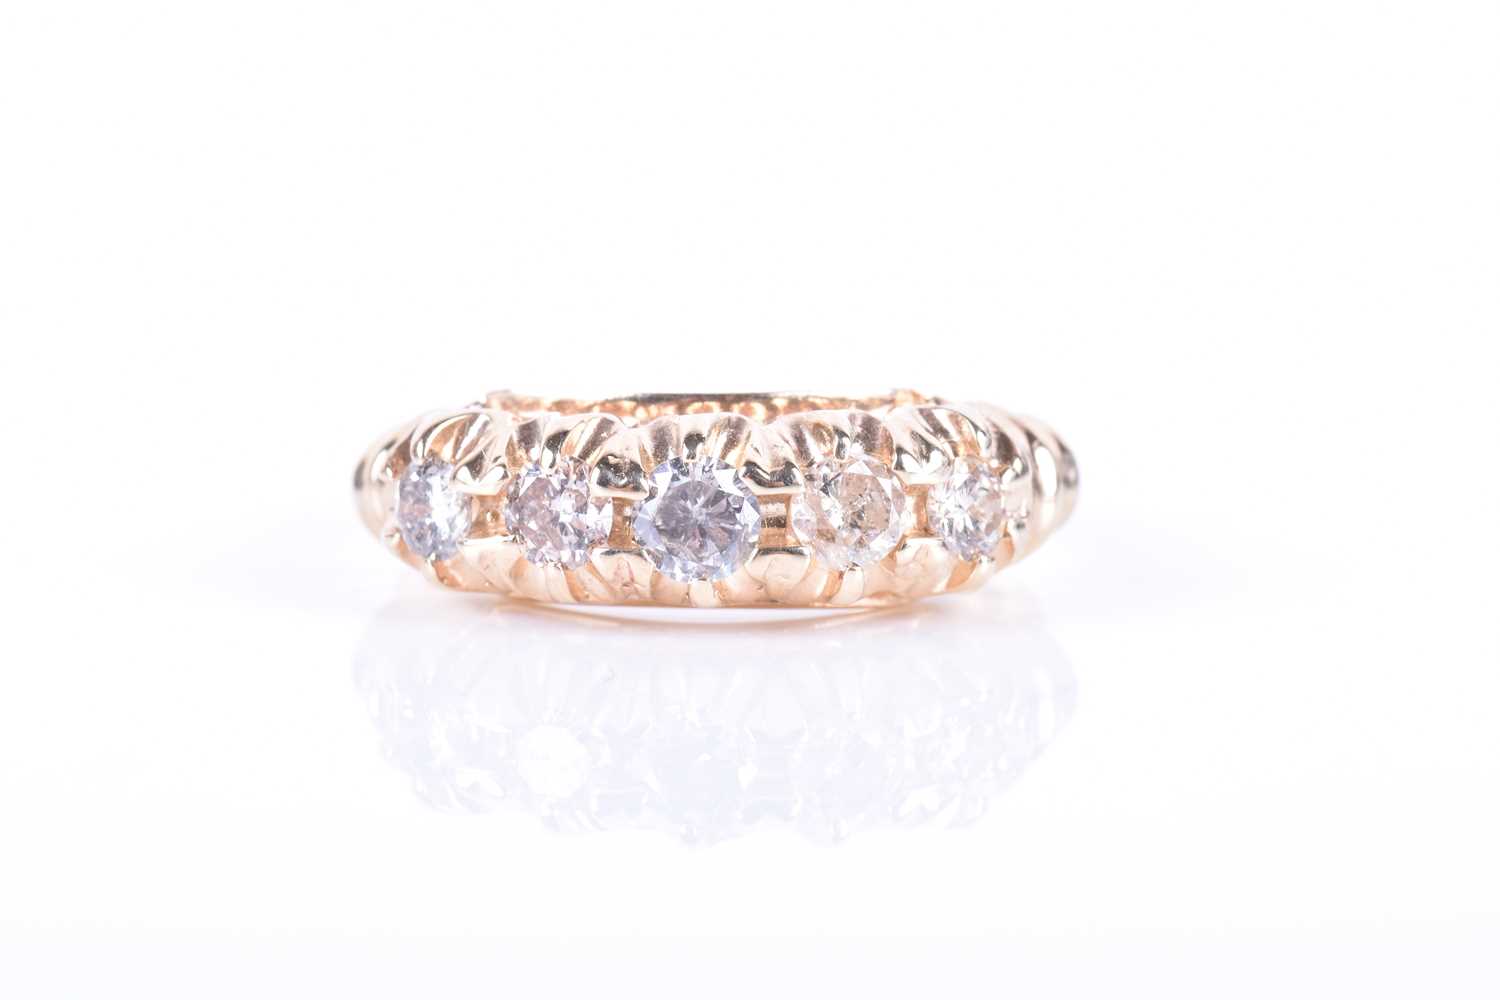 A yellow metal and five stone diamond ringset with five round-cut diamonds of approximately 0.45